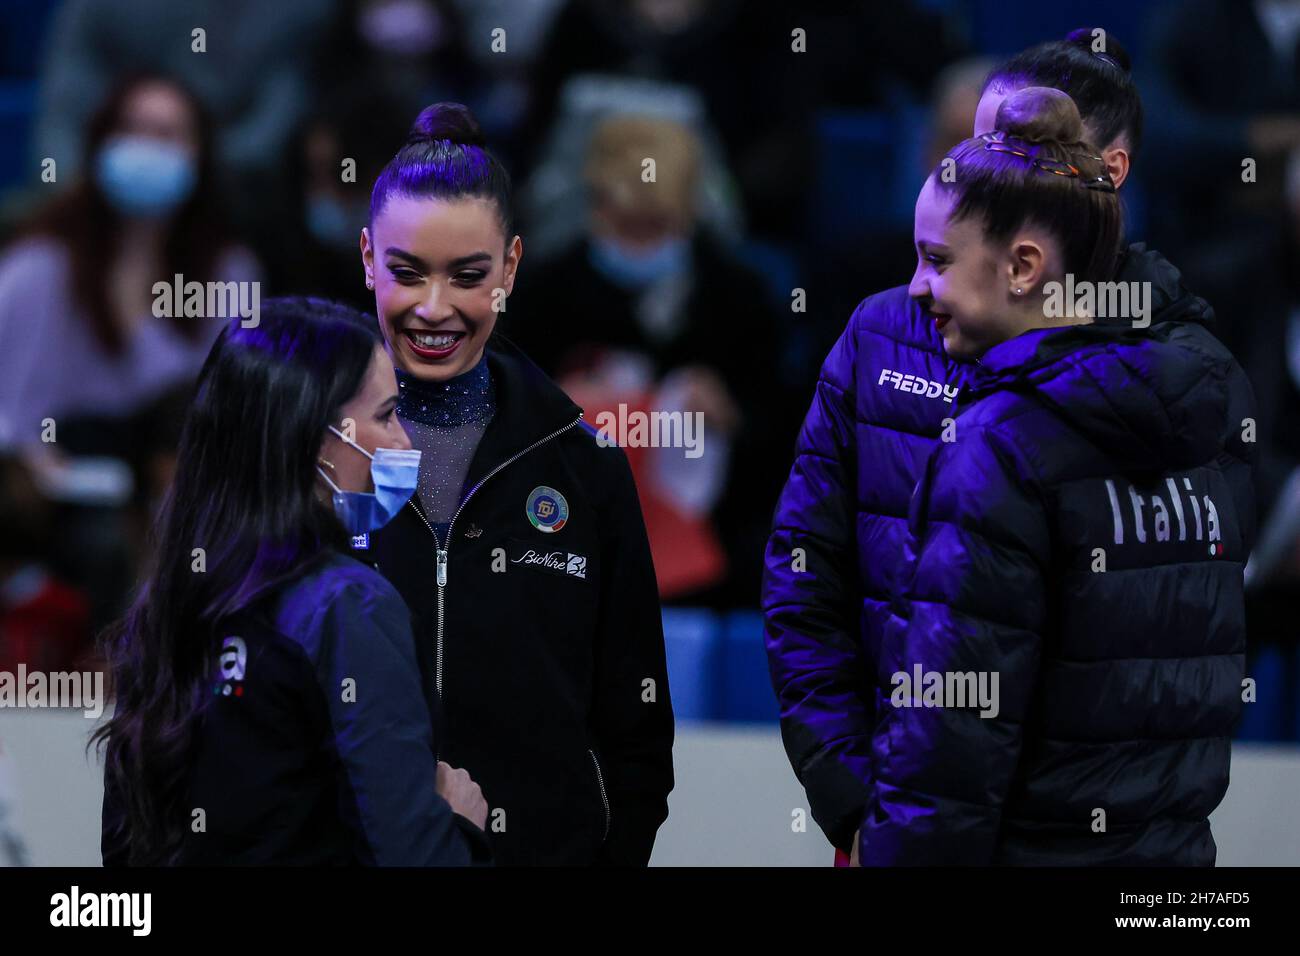 Milan, Italy. 20th Nov, 2021. Alessia Maurelli of Rhythmic Italy Group with Vanessa Ferrari of GAF Italy Team and Martina Santandrea of Rhythmic Italy Group during the Gymnastics Grand Prix 2021 at Allianz Cloud Arena, Milan, Italy on November 20, 2021 Credit: Independent Photo Agency/Alamy Live News Stock Photo